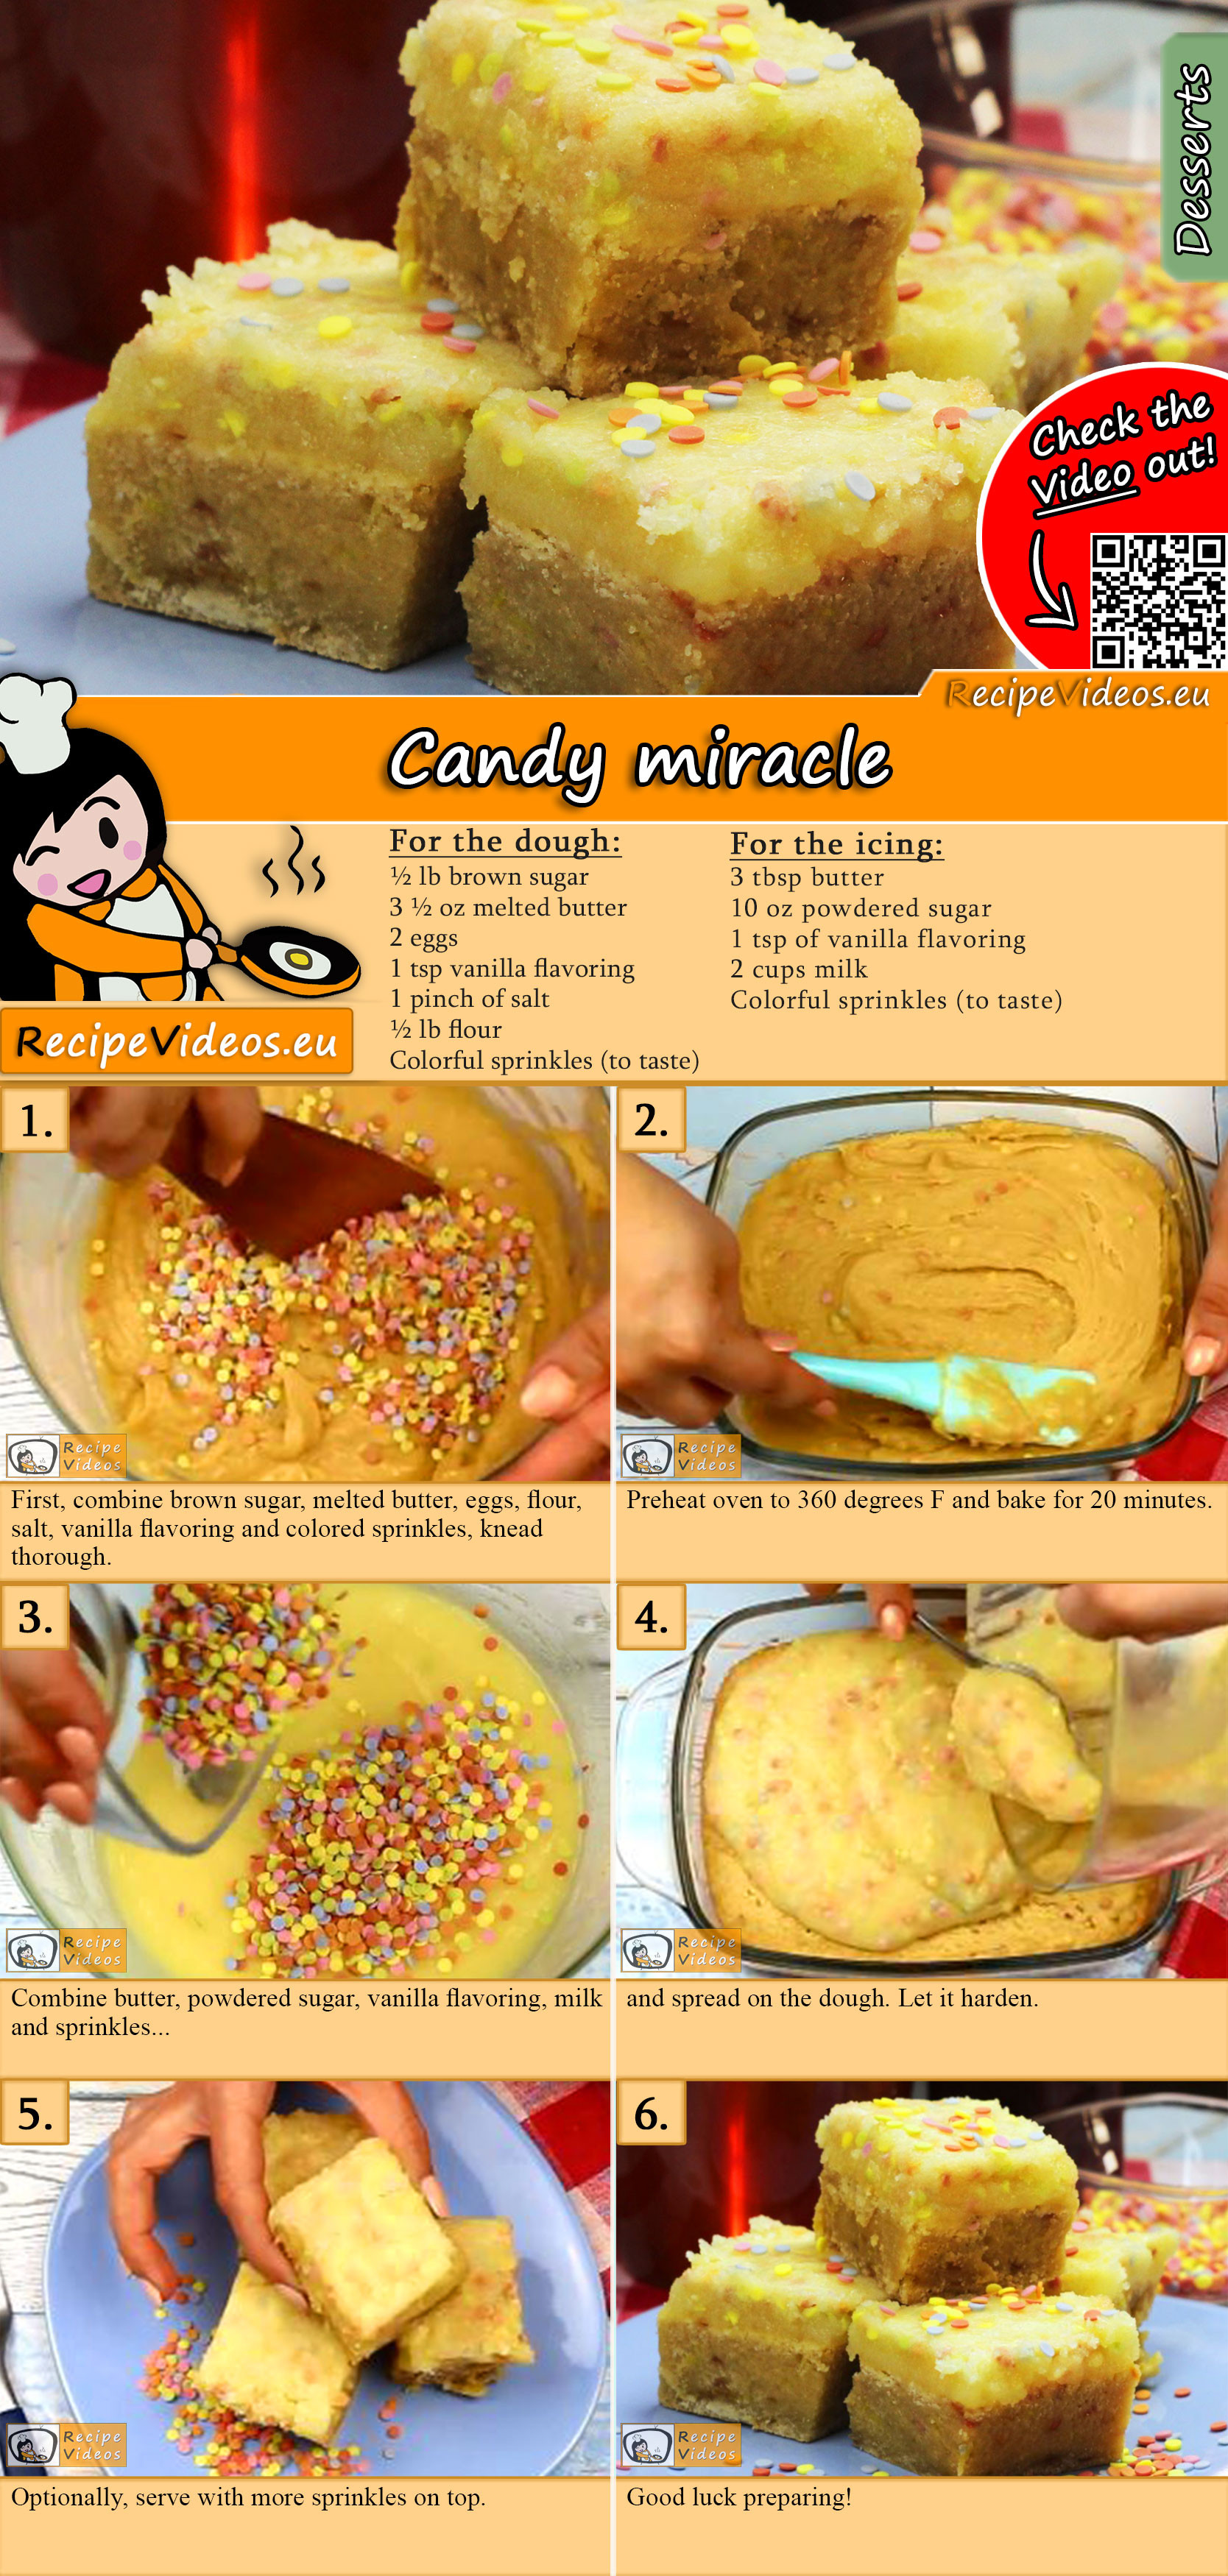 Candy miracle recipe with video